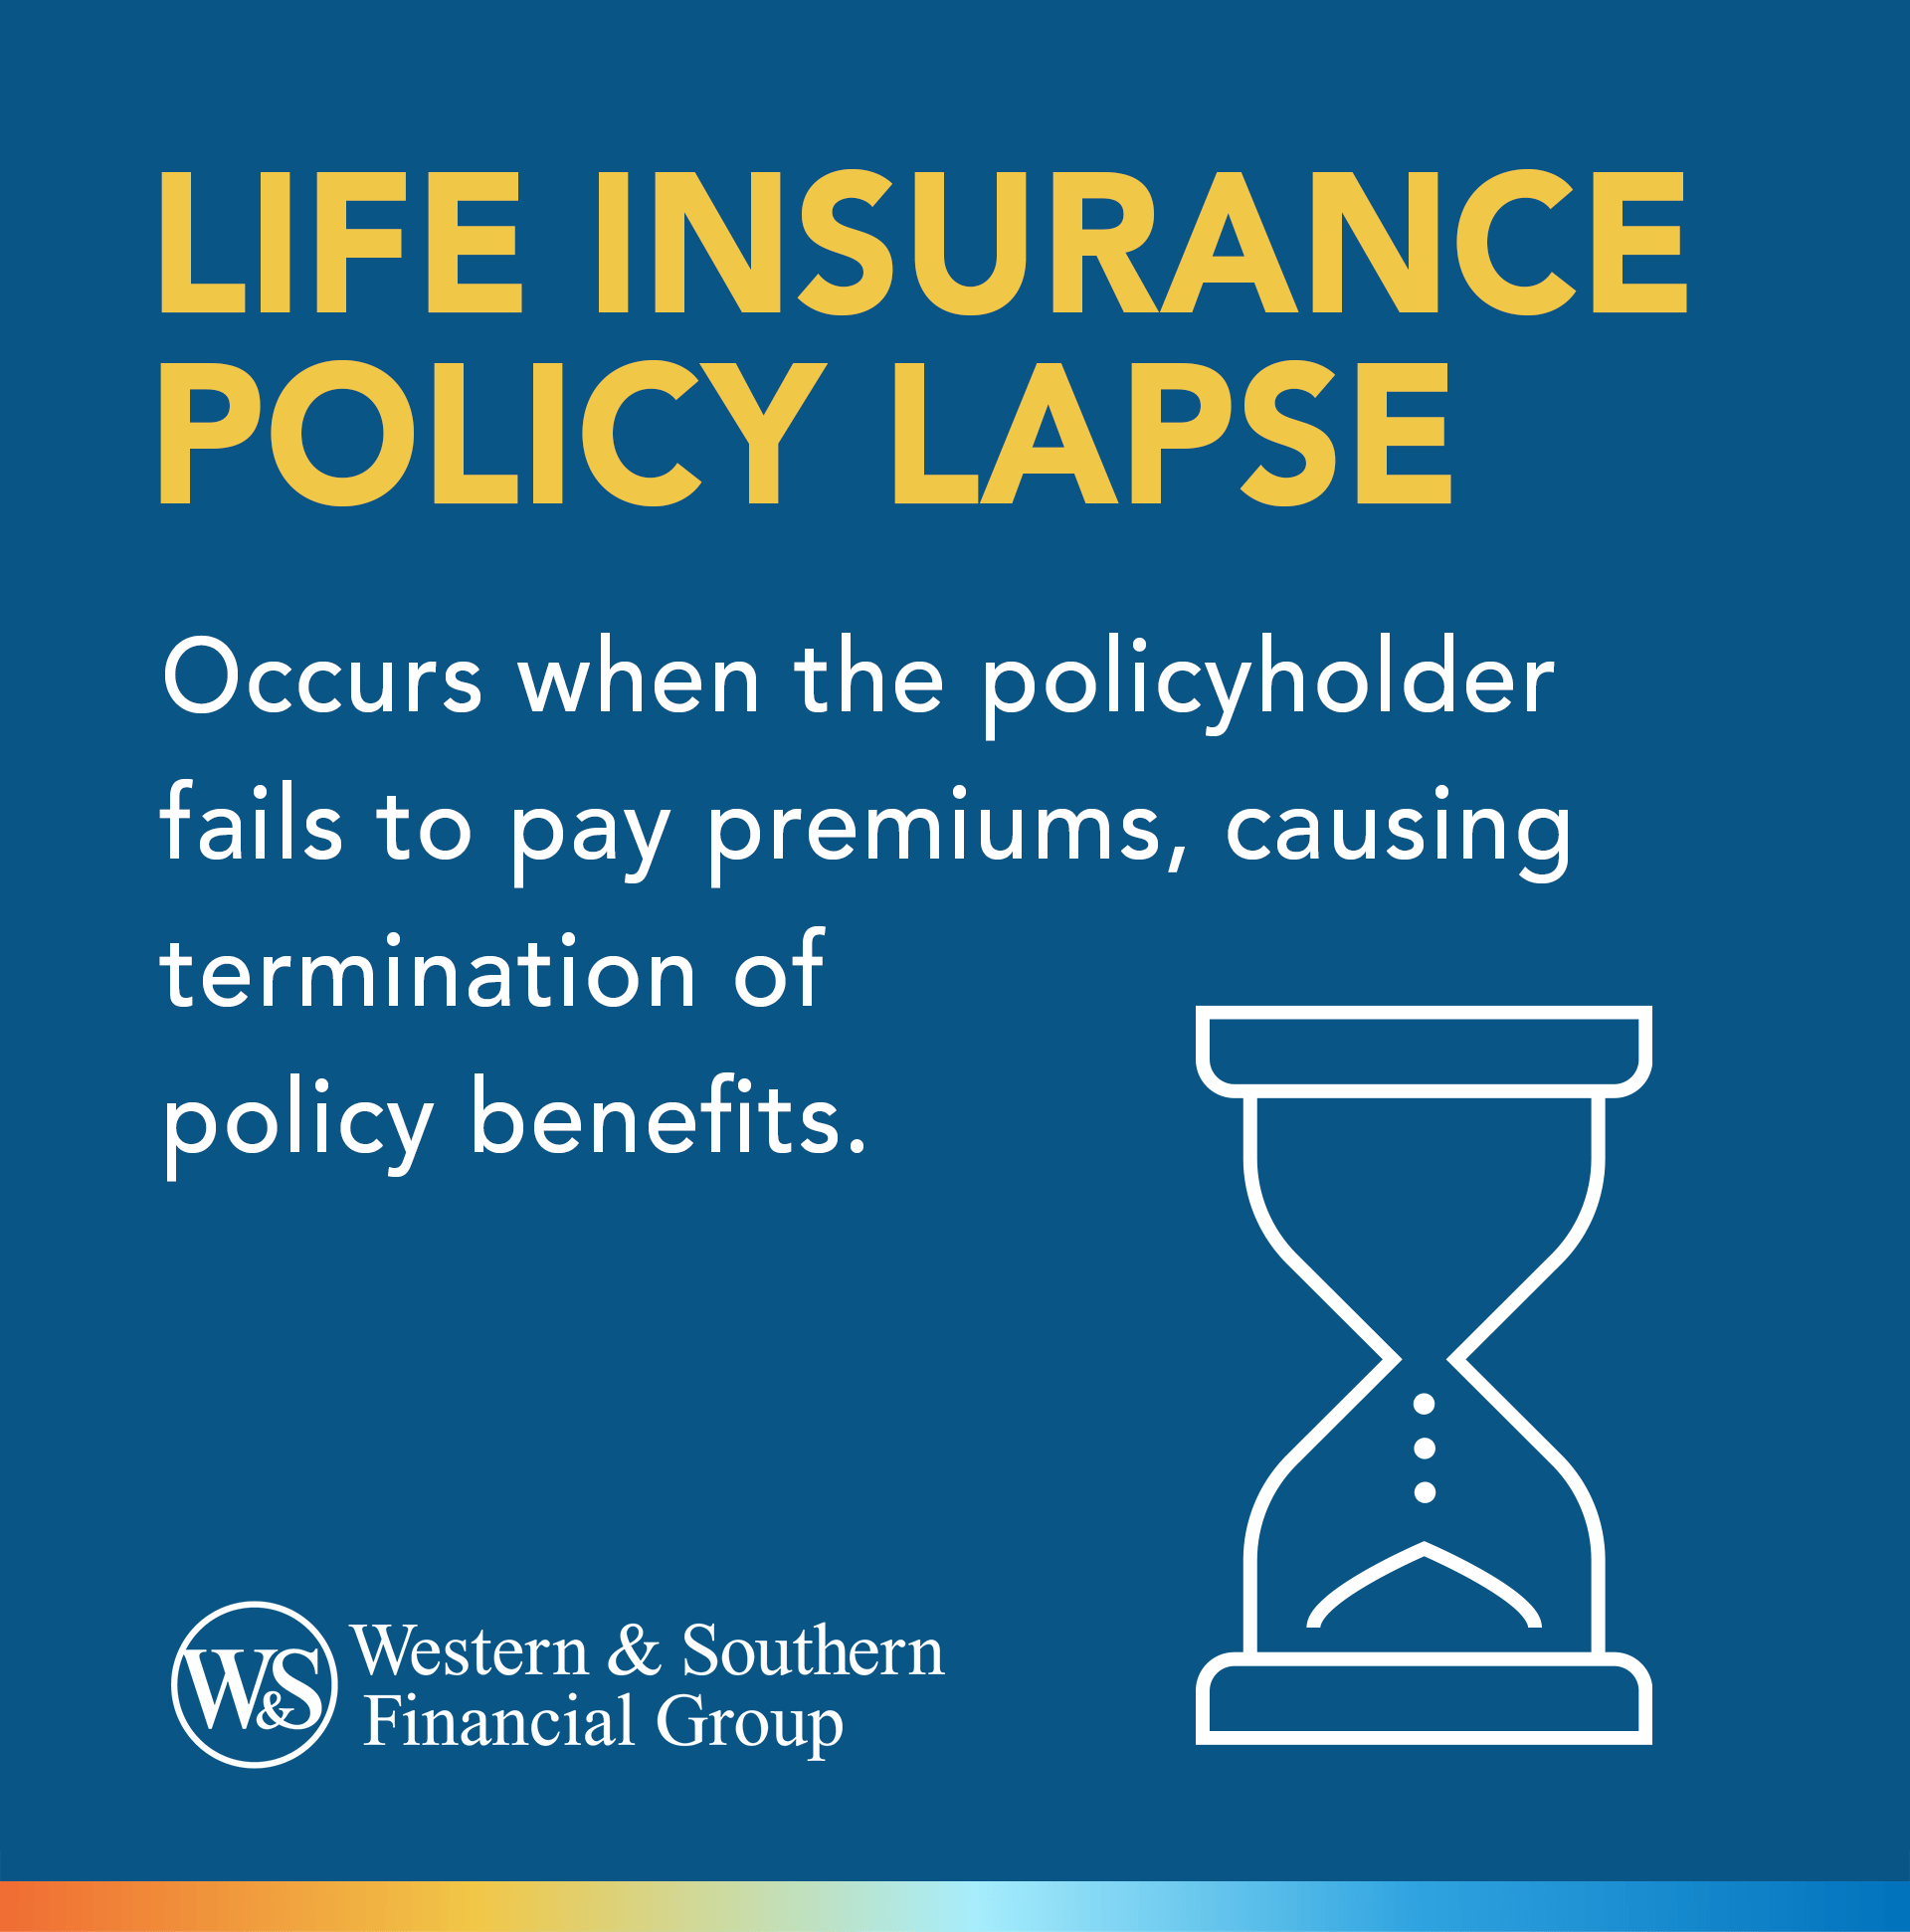 Life Insurance Policy Lapse Definition